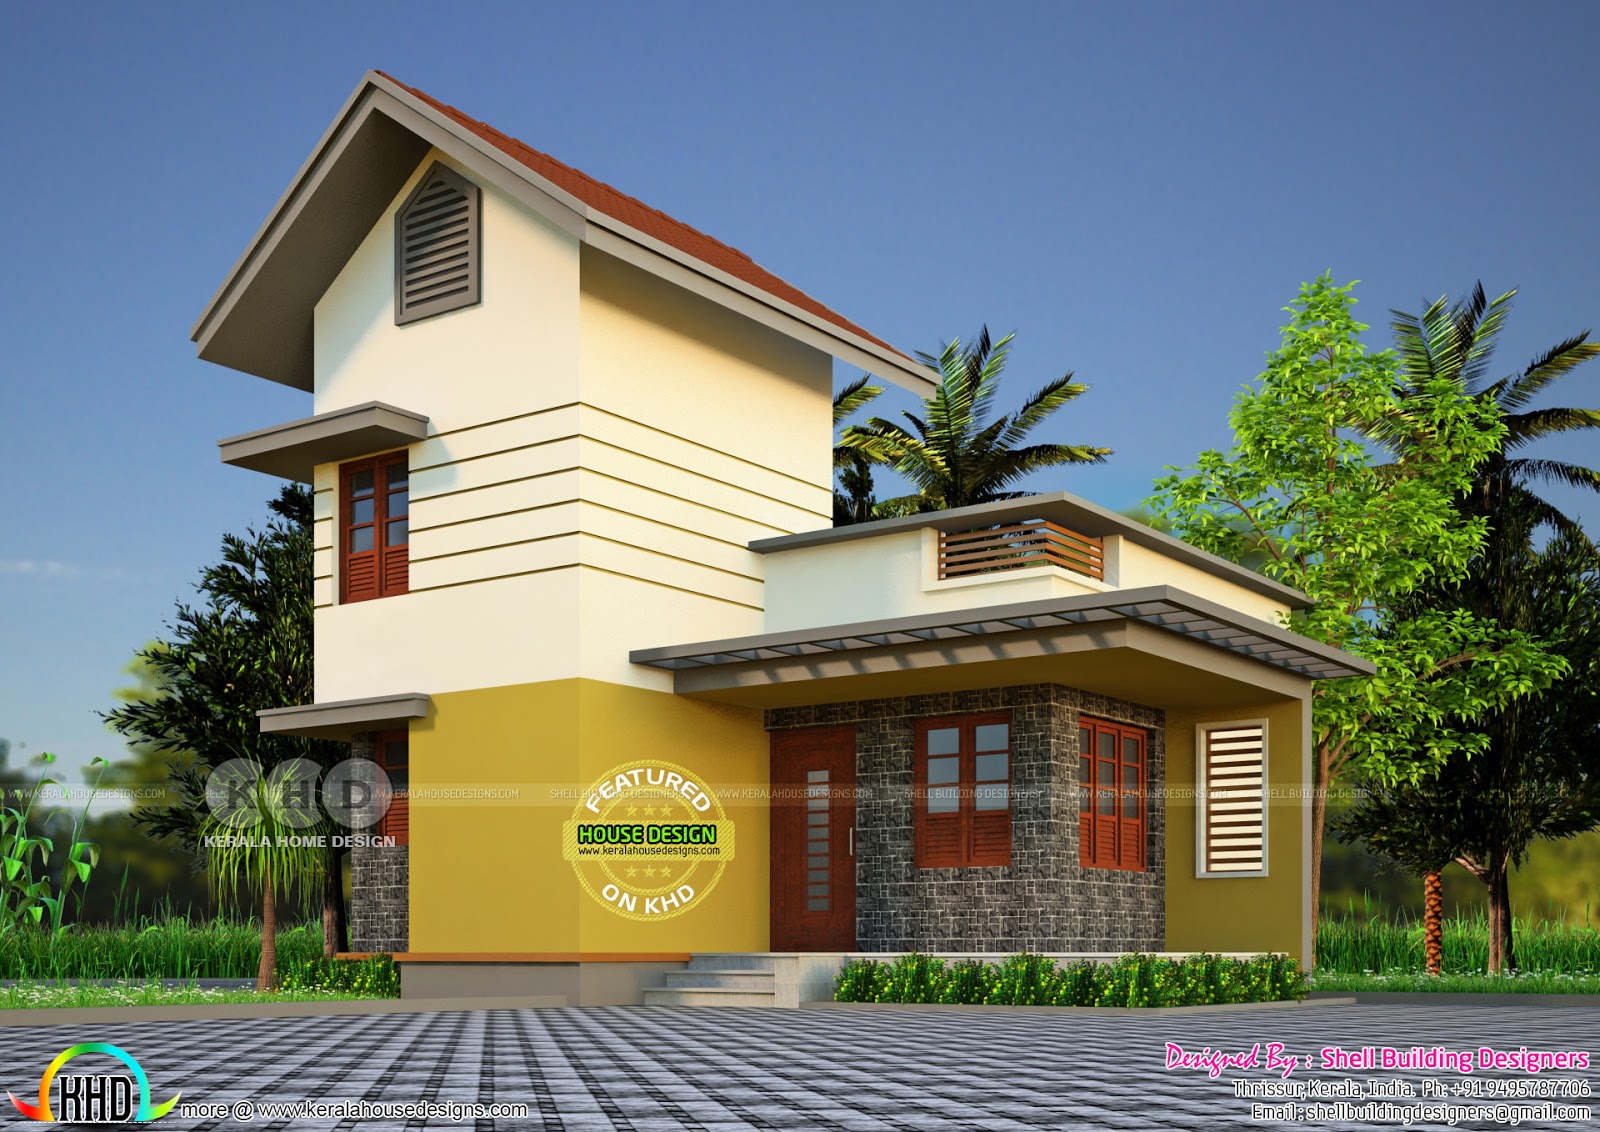  700  Sq  ft  Home  with Different Elevations Kerala home  